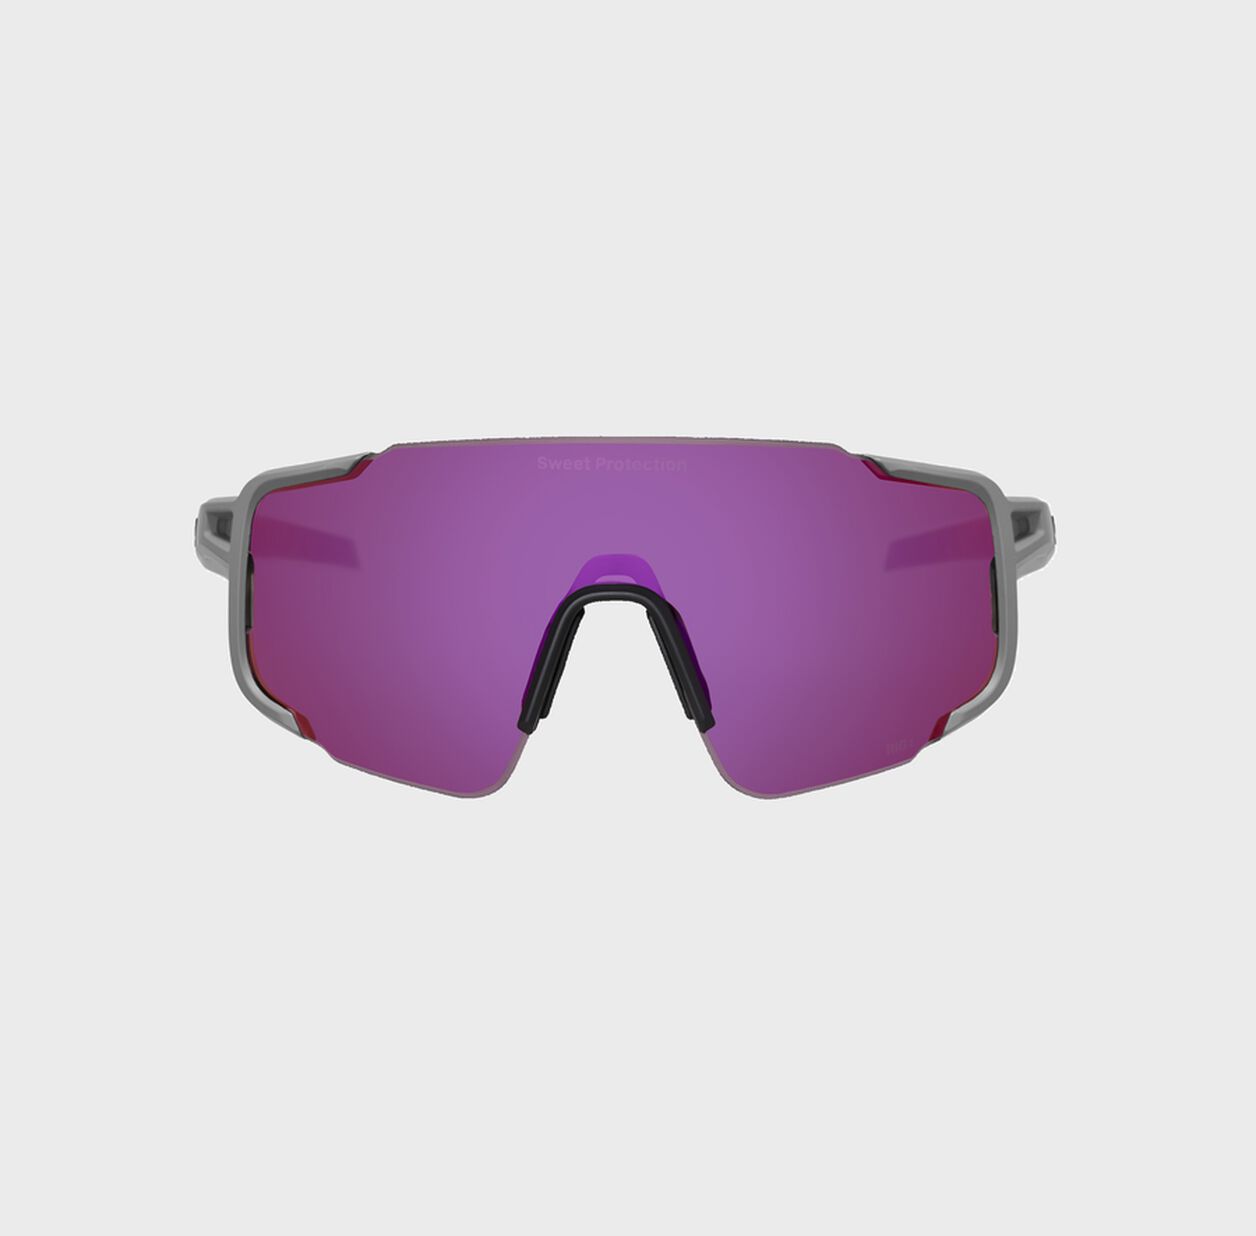 Sweet Protection - Sunglasses Ronin Max RIG Reflect Nardo Gray Sunglasses Sweet Protection 